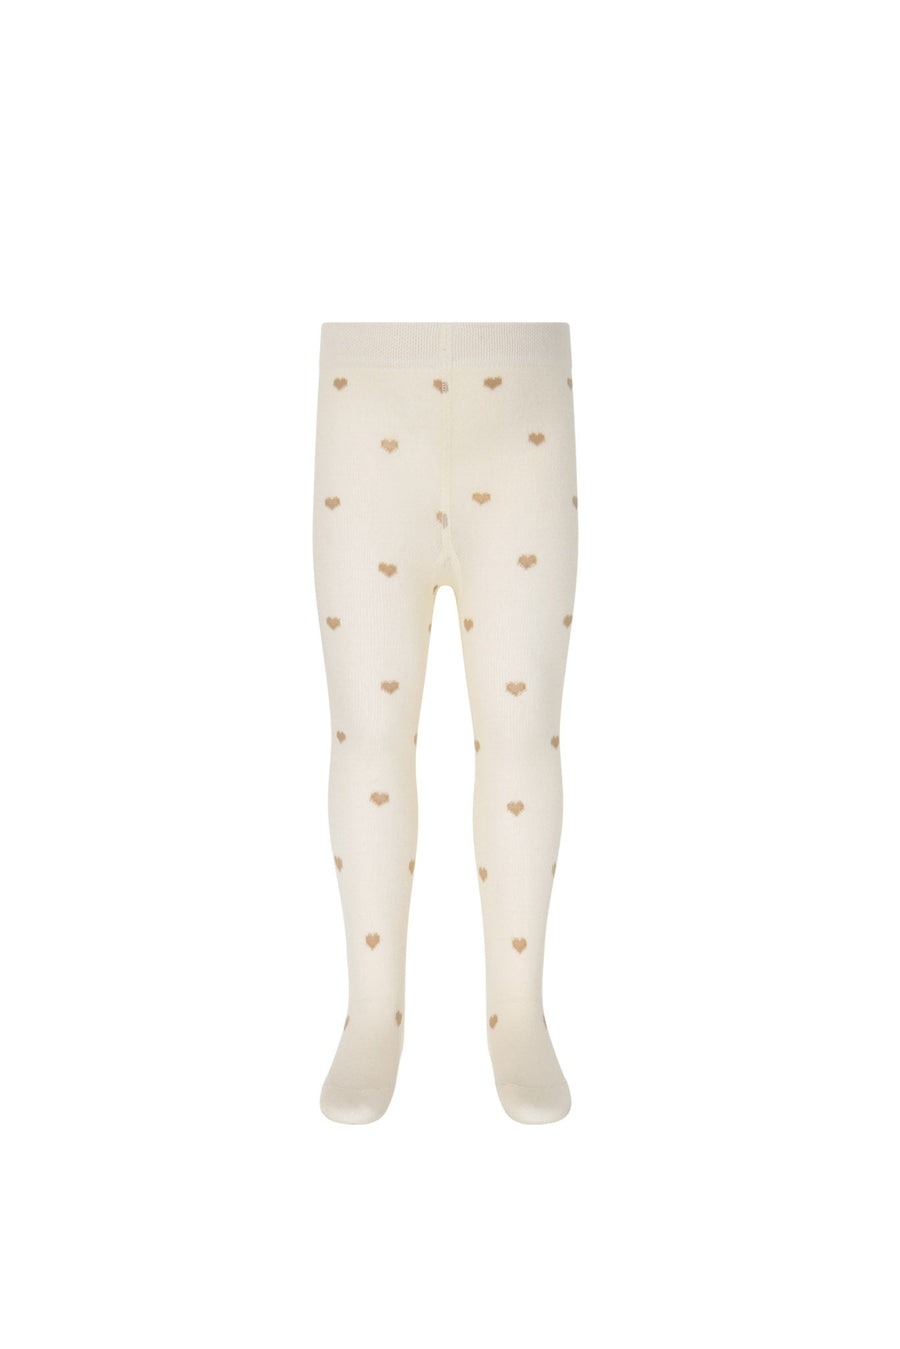 Jacquard Heart Tight - Mon Amour Oatmeal Marle Childrens Tight from Jamie Kay USA